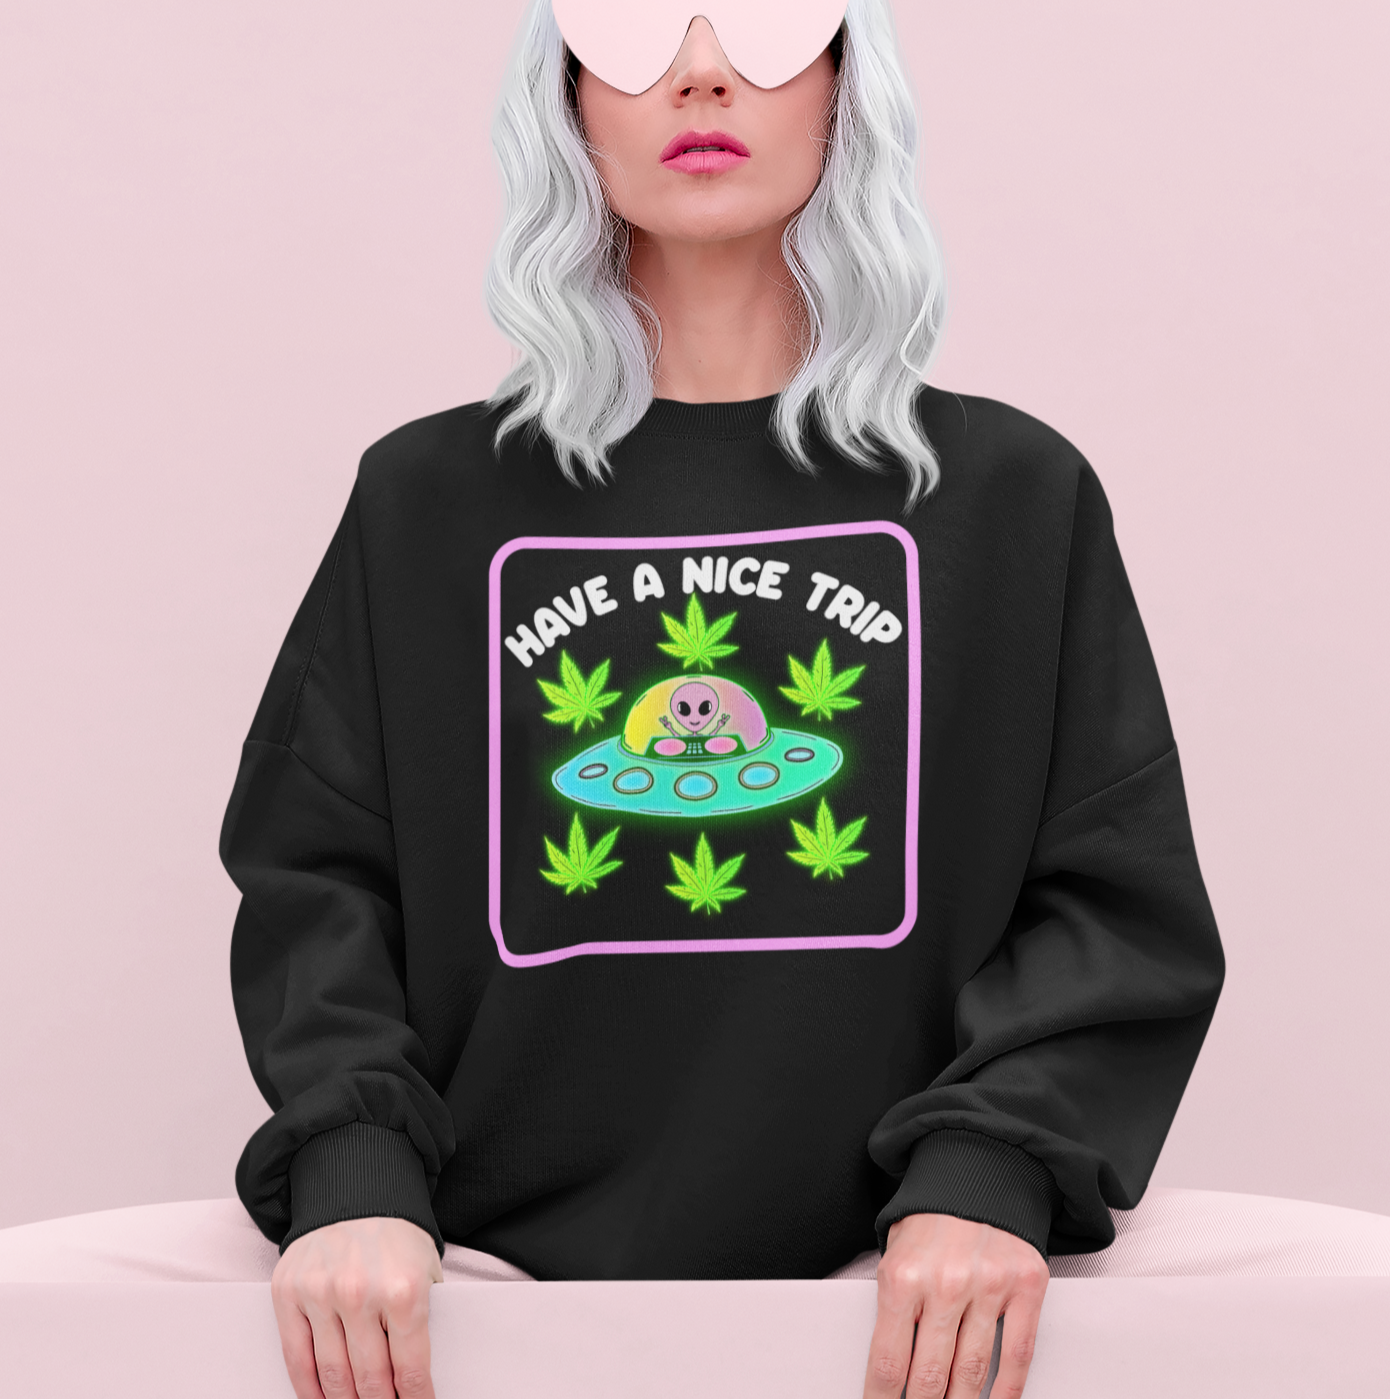 White sweatshirt with an alien and weed leaf saying have a nice trip - HighCiti